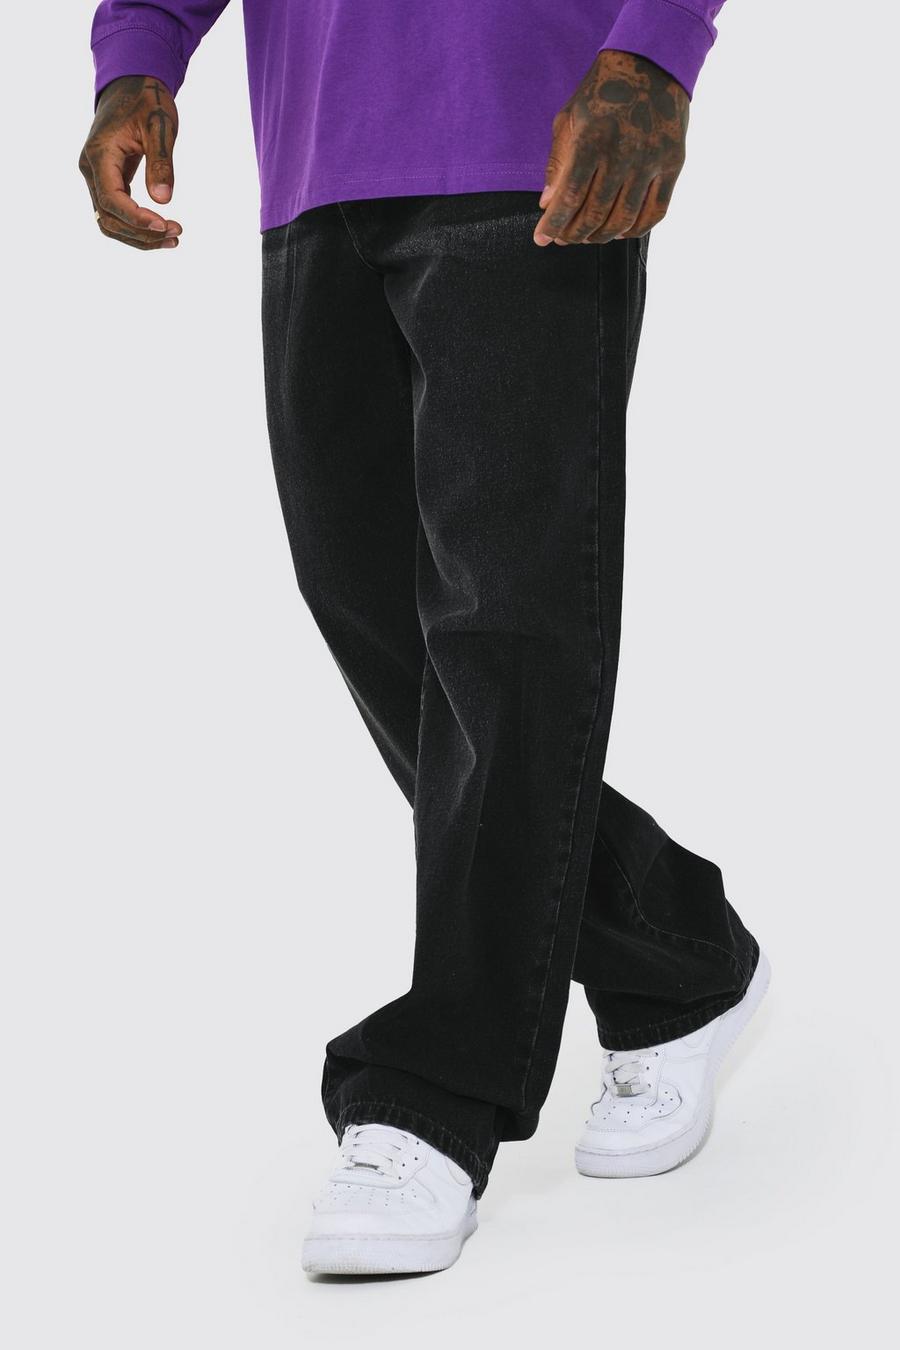 Baggy Jeans - Charcoal Black